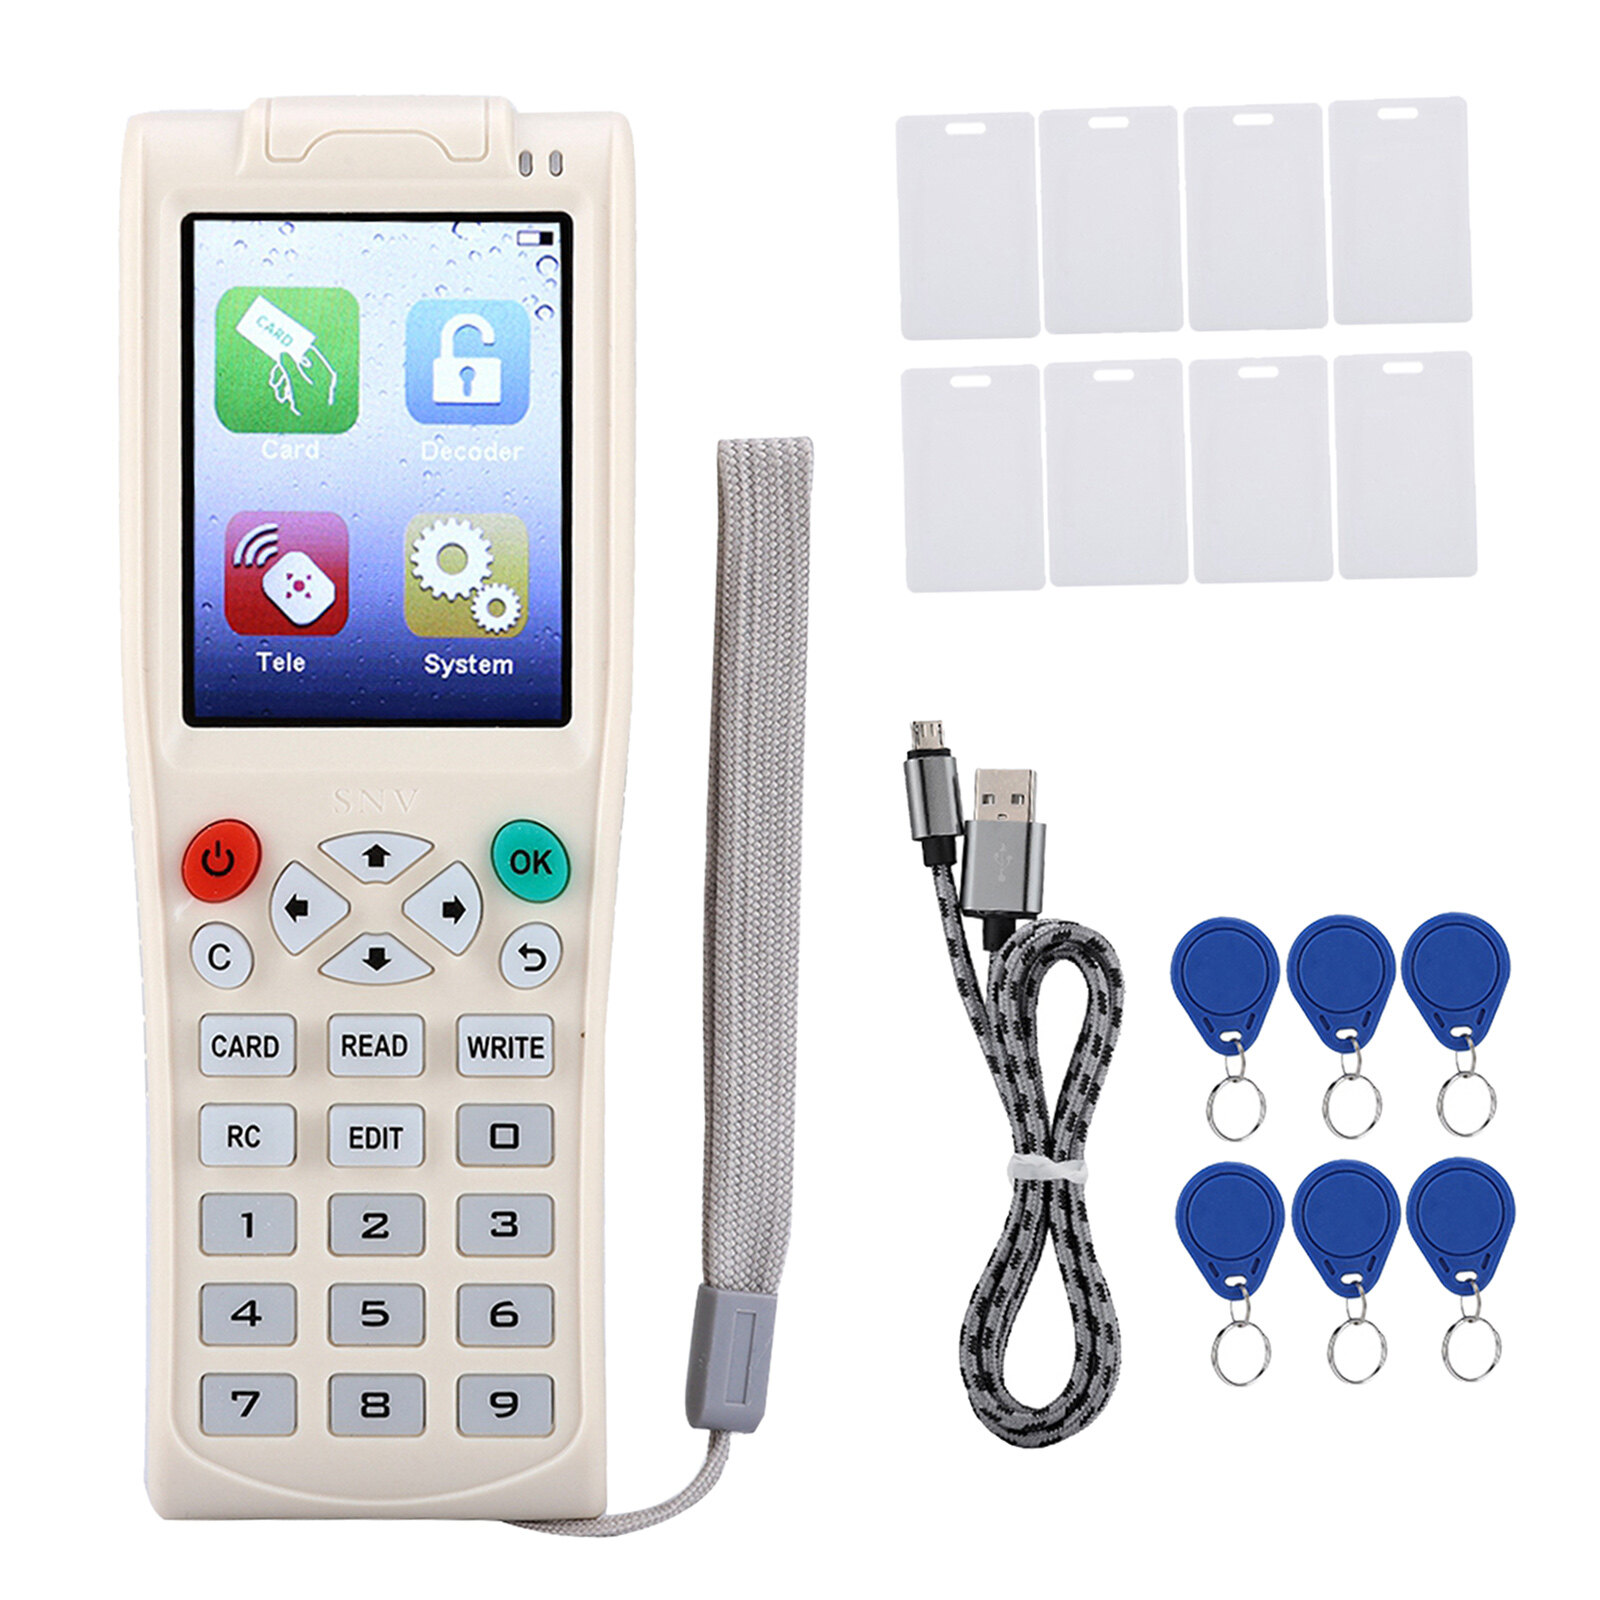 Card reader ID/IC Card RFID Frequency Card Reader Replicator for Access Controller Card Duplicator 